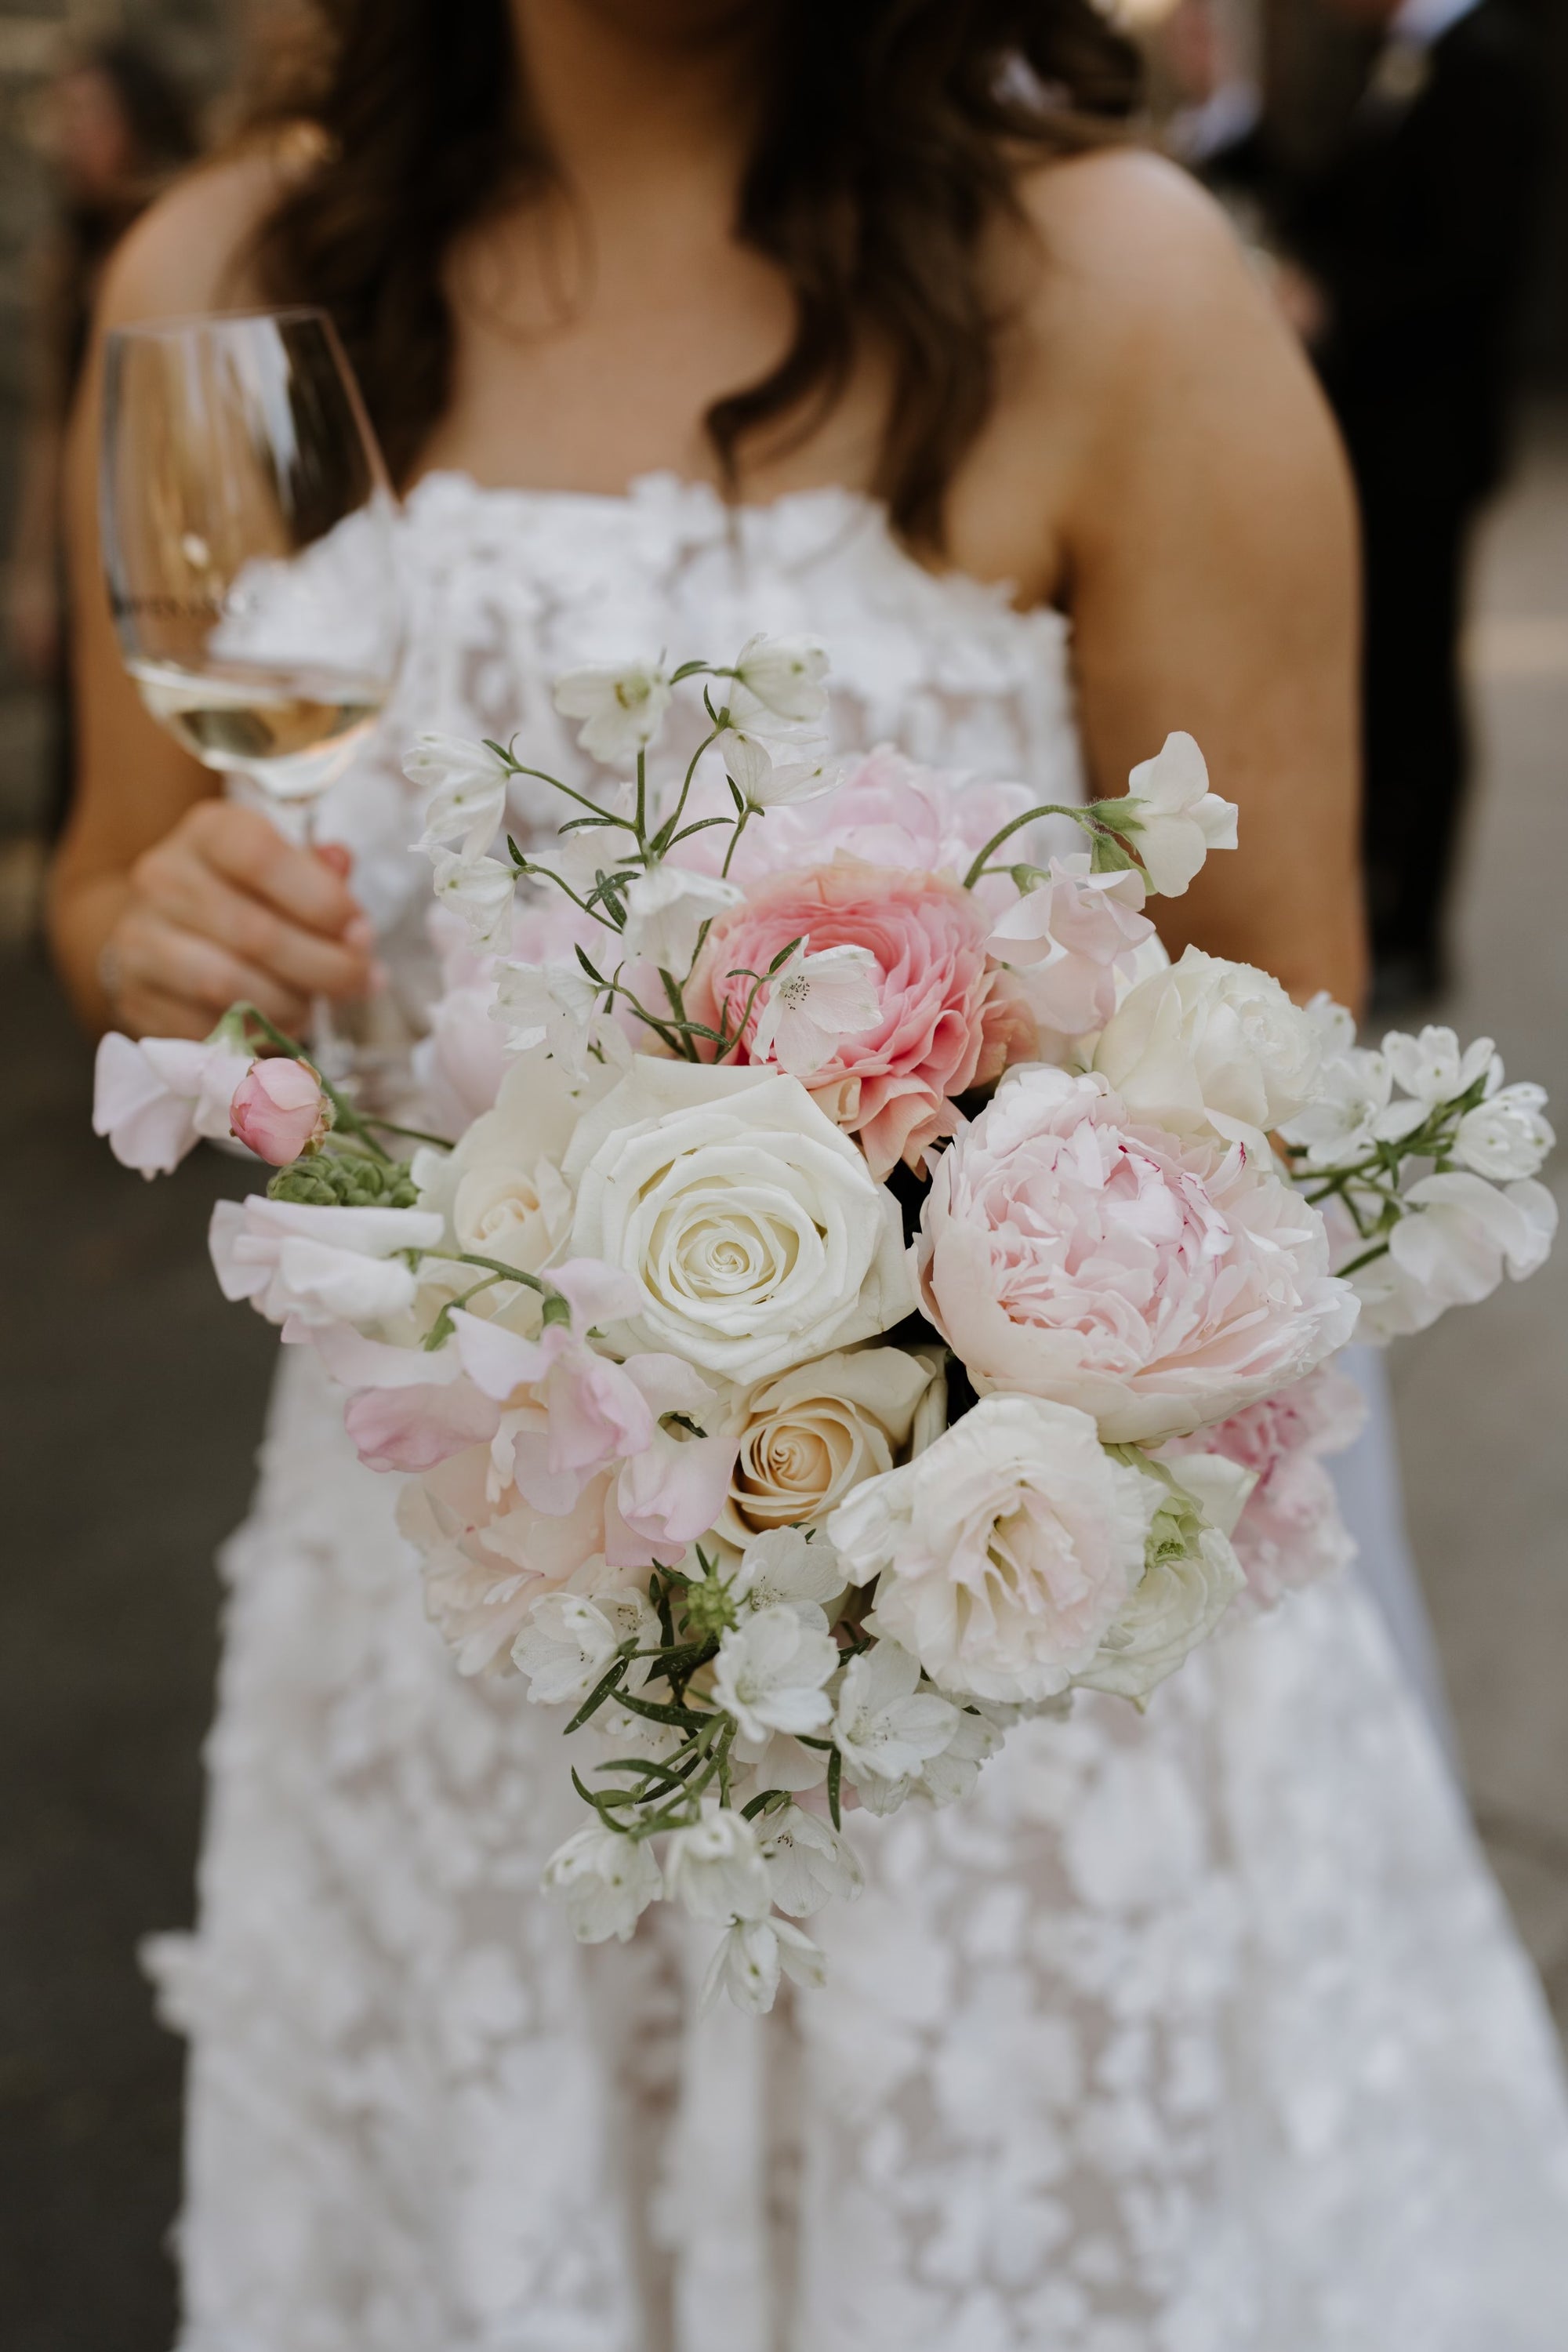 Weddings and Event flowers, Wedding flowers Melbourne, Bridal party, wedding styling